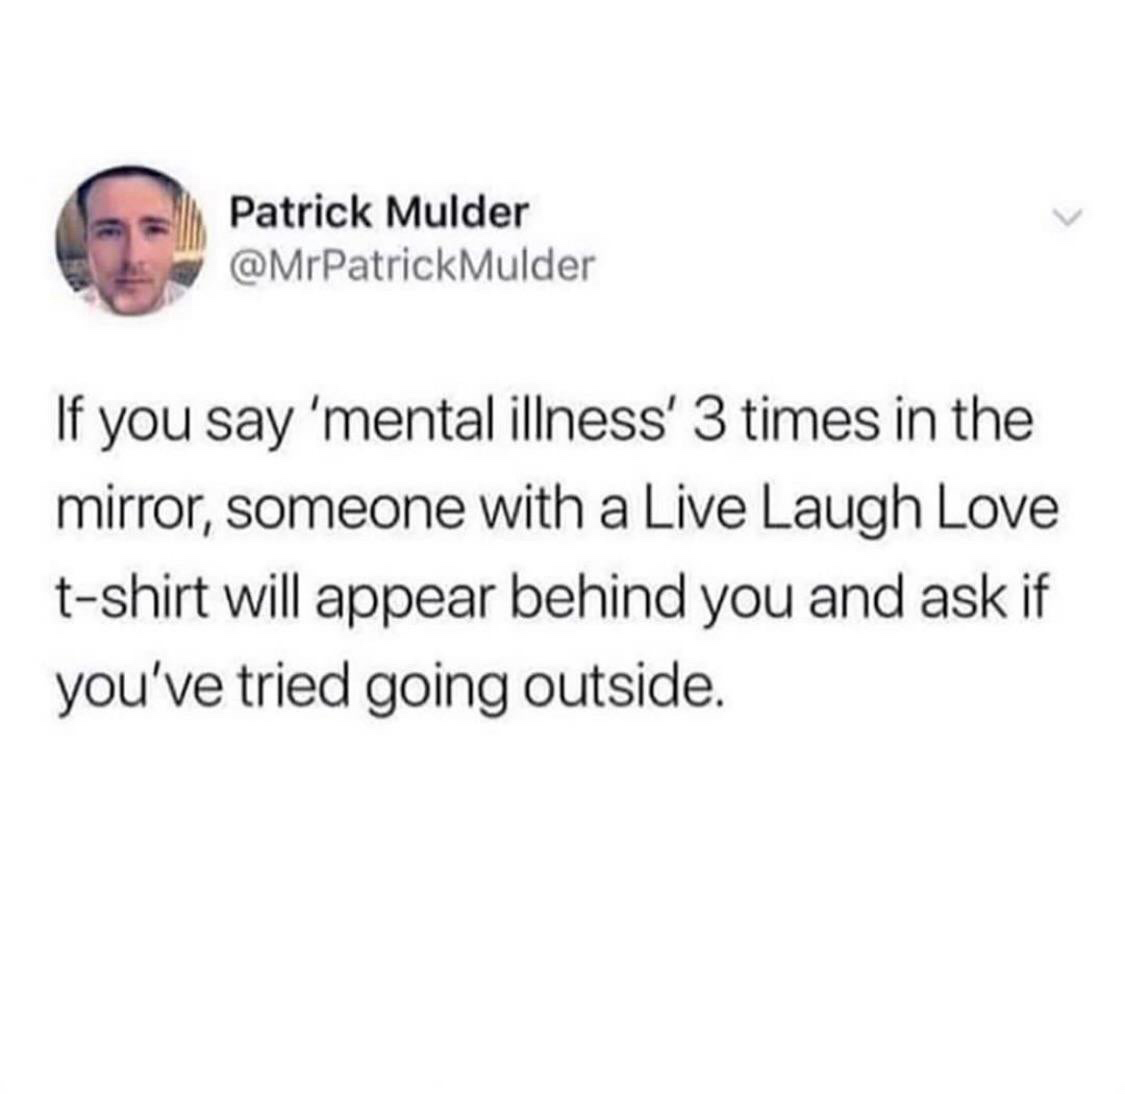 mariah carey i don t want a lot for christmas meme - Patric Patrick Mulder Mulder If you say 'mental illness' 3 times in the mirror, someone with a Live Laugh Love tshirt will appear behind you and ask if you've tried going outside.